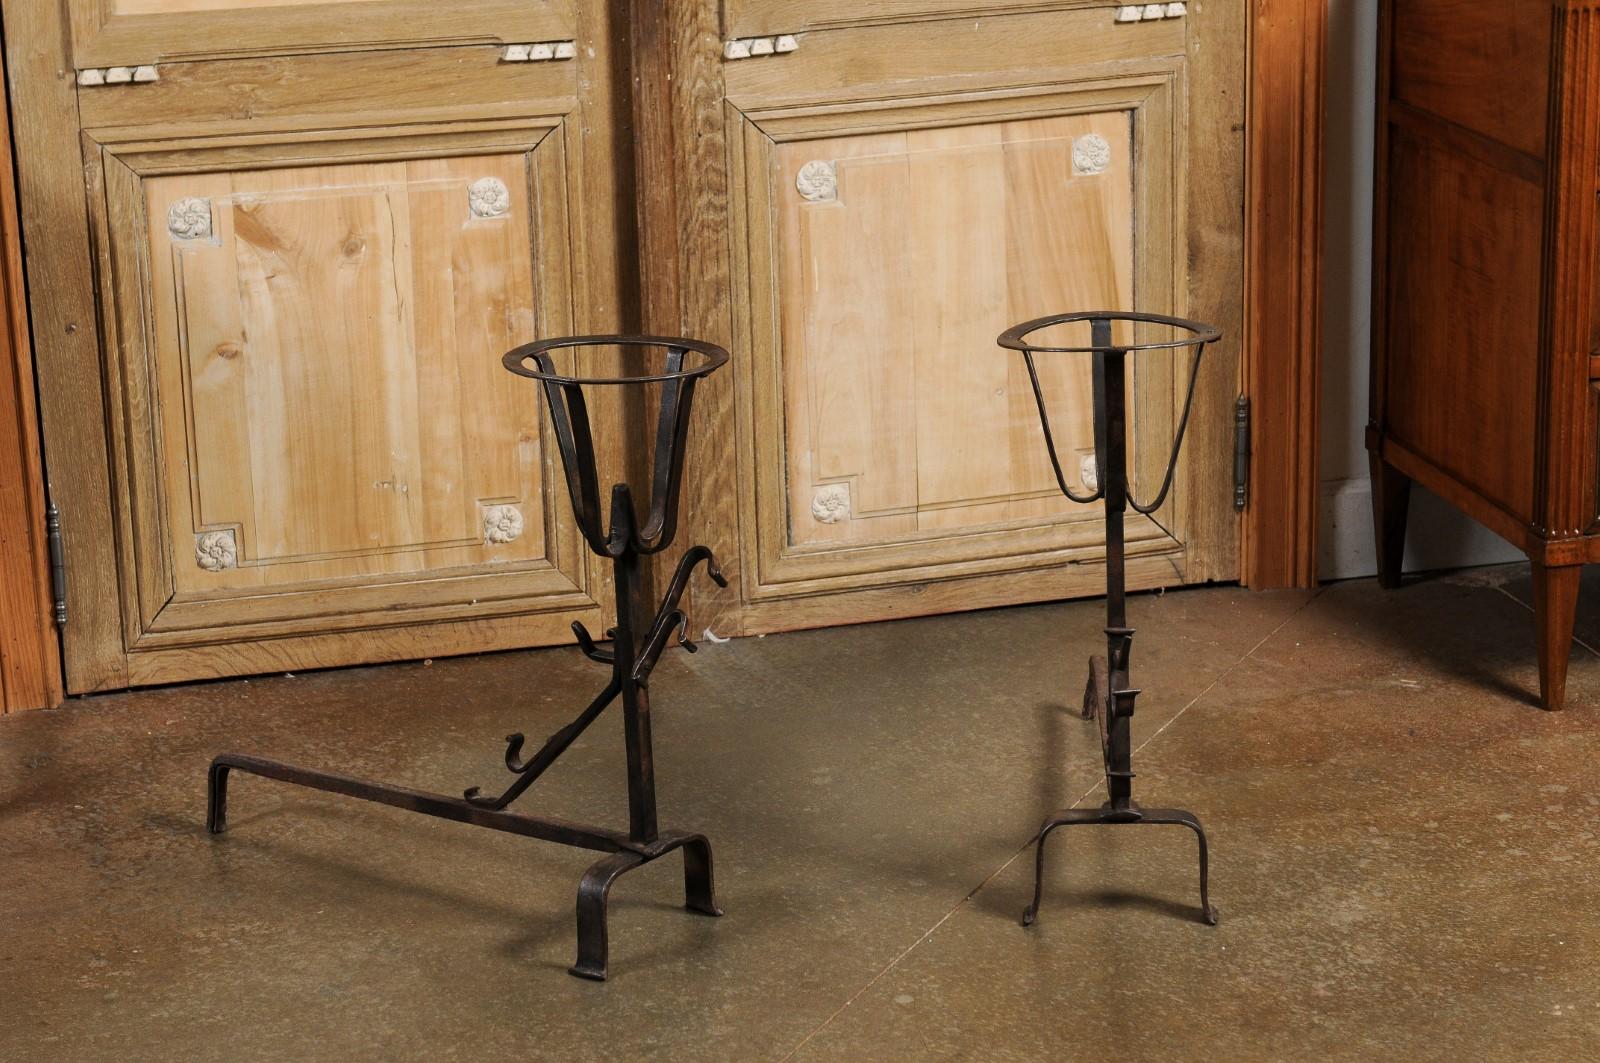 A pair of French Napoléon III period andirons from the late 19th century. Created in France at the end of Emperor Napoléon III's reign to hold flaming firewood slightly above the firebox floor, each of this pair of andirons features a circular